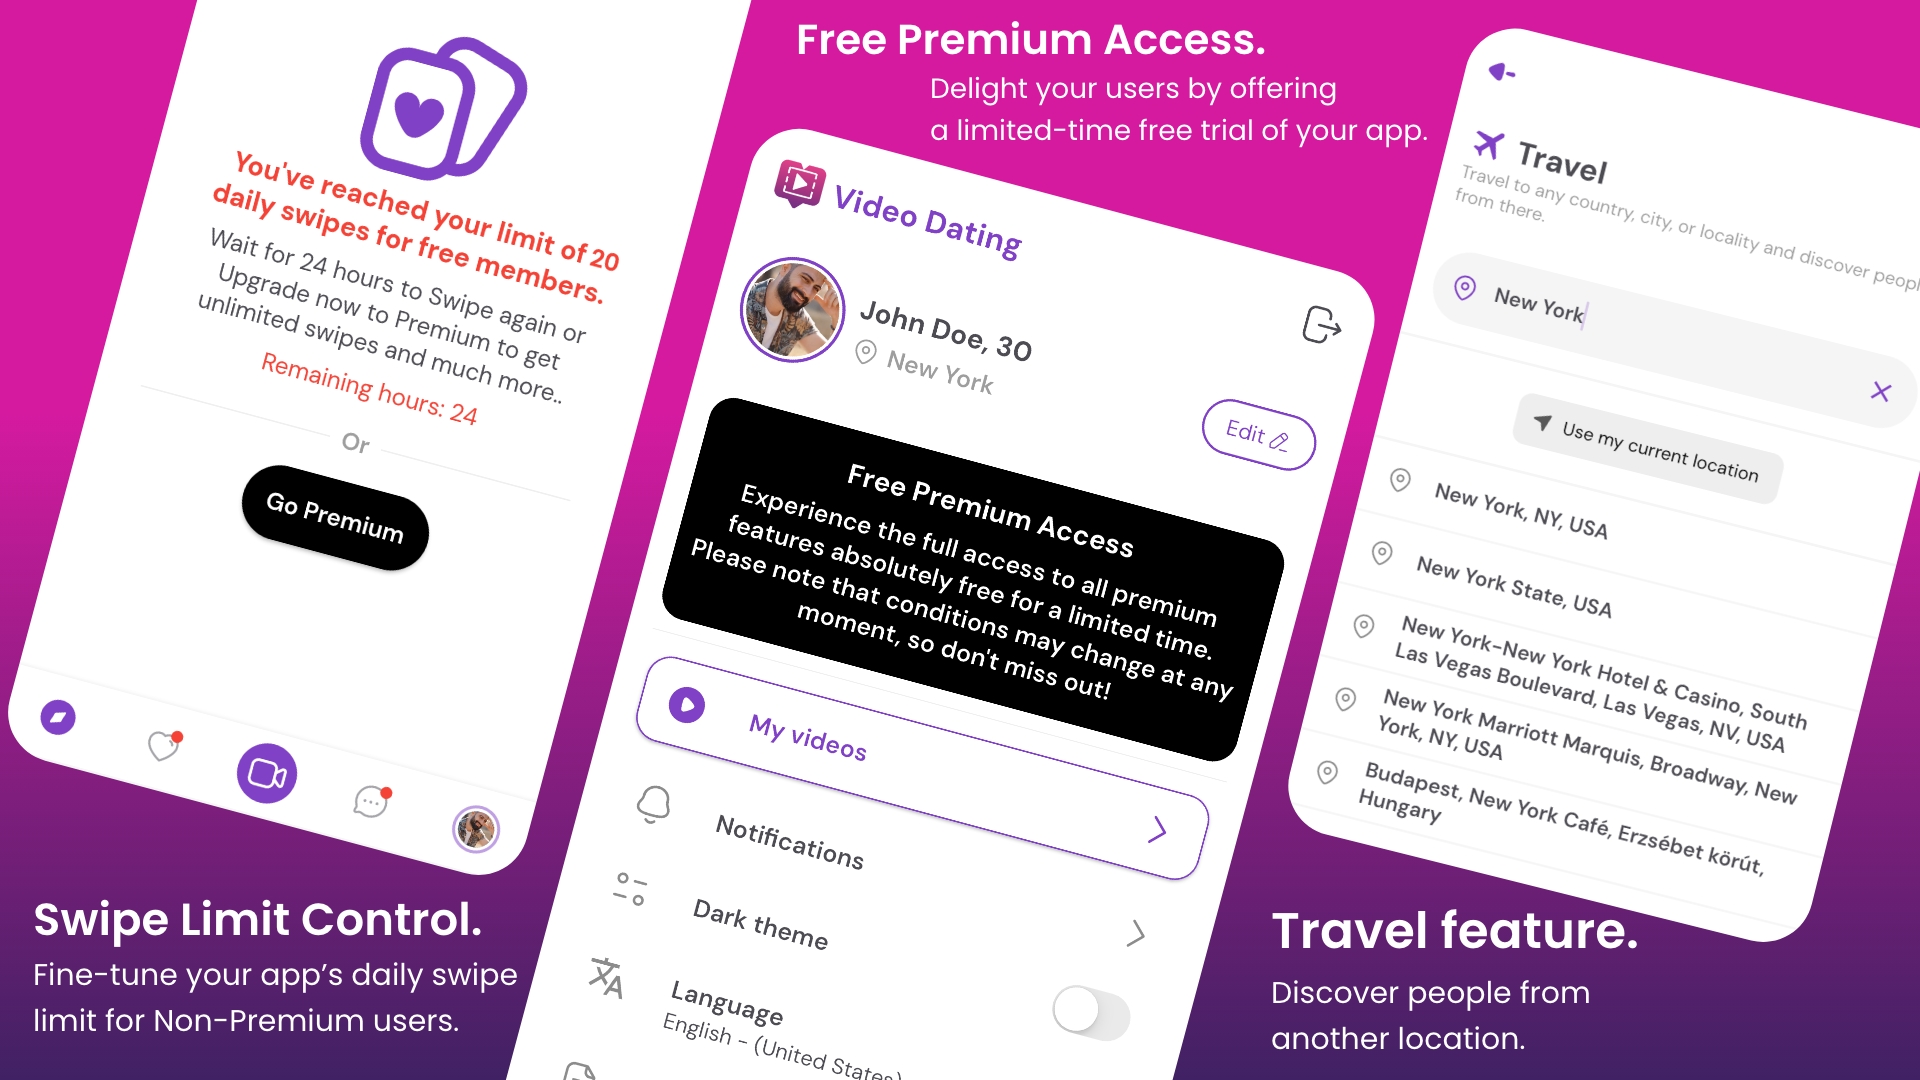 Swipe limit, Free Premium Access and Travel features